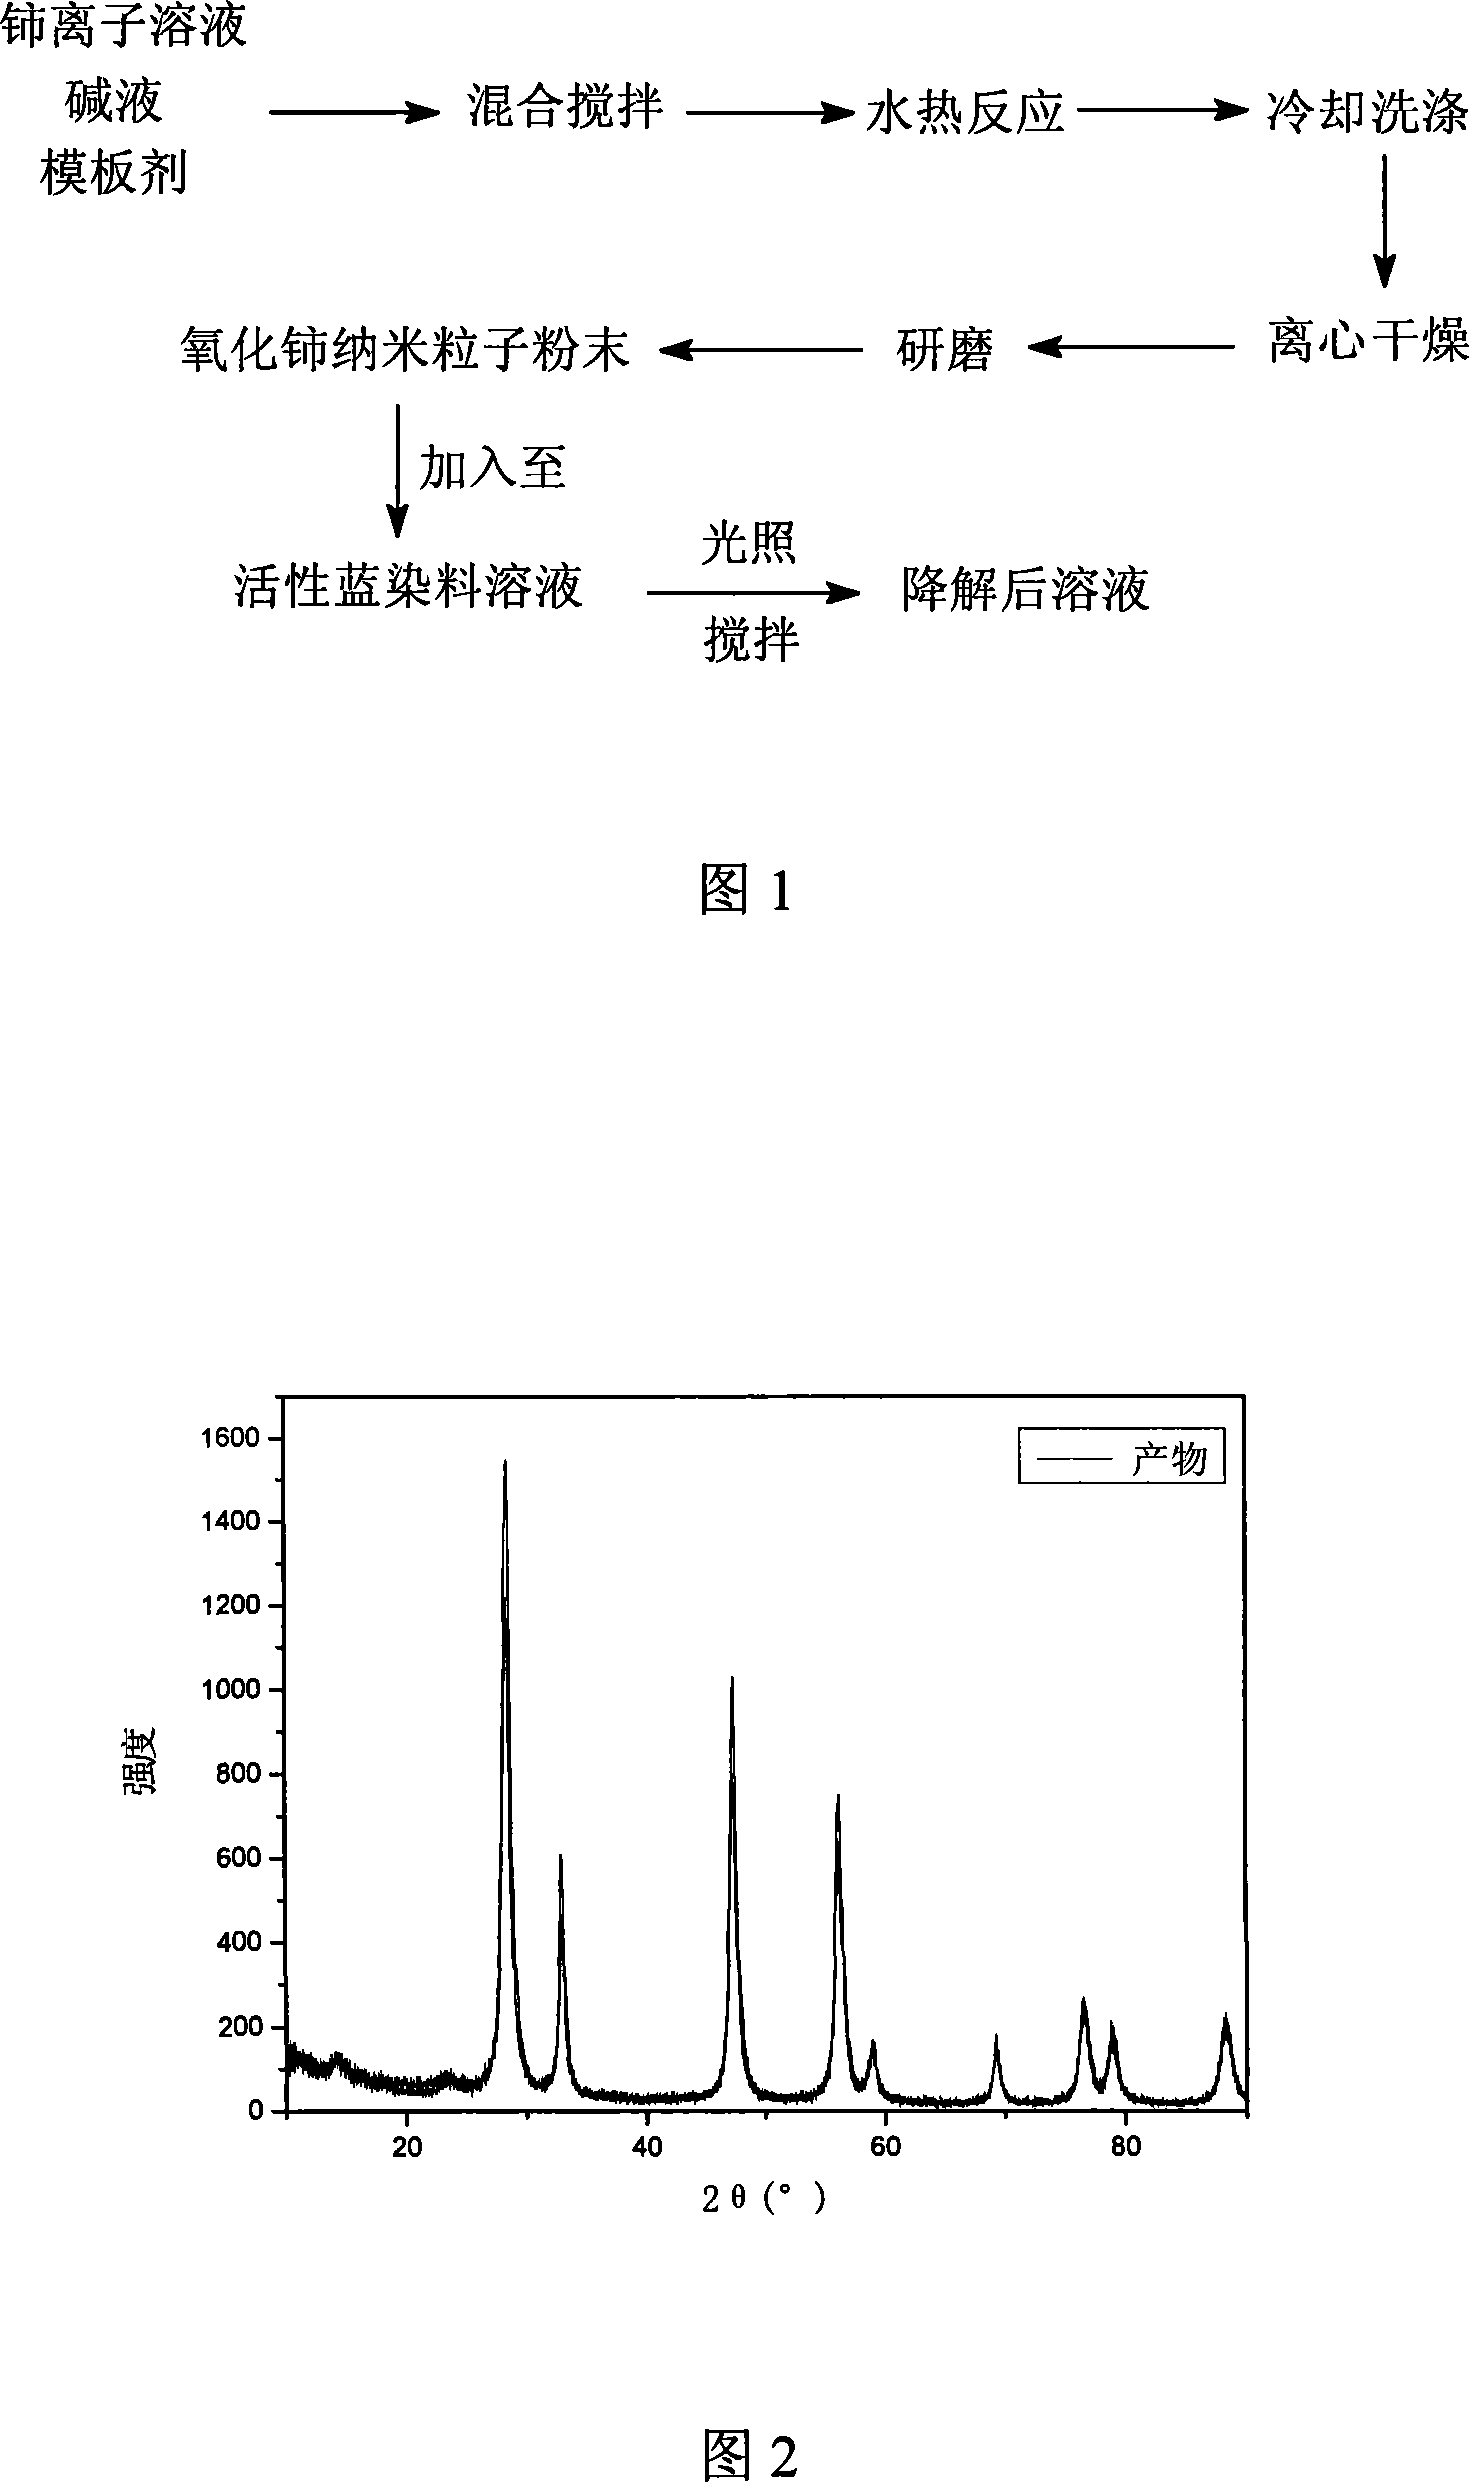 Method for degrading dyeing waste water by using cerium oxide nano particle as catalyst